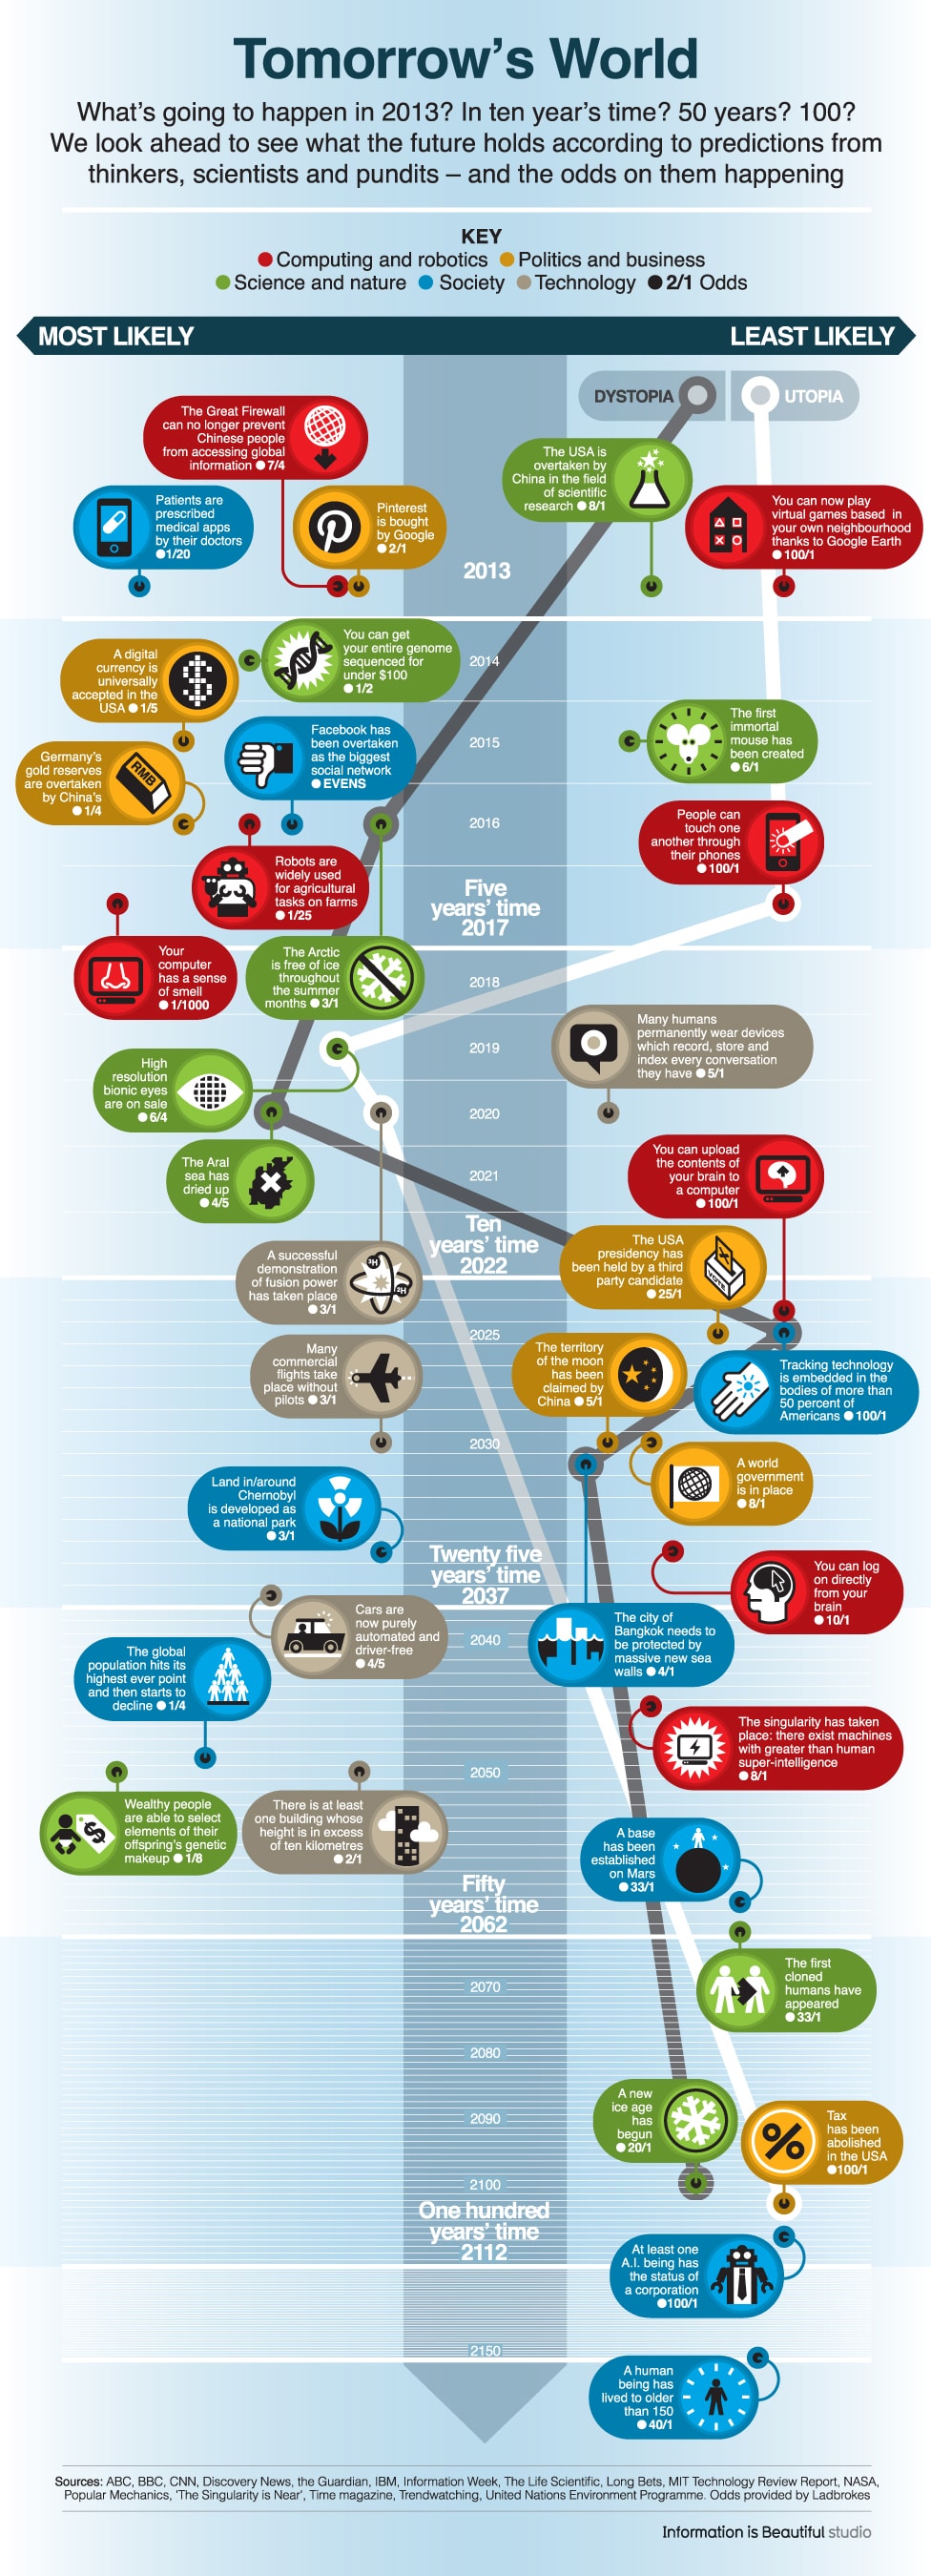 40 Technology Predictions For The Next 150 Years [Infographic]